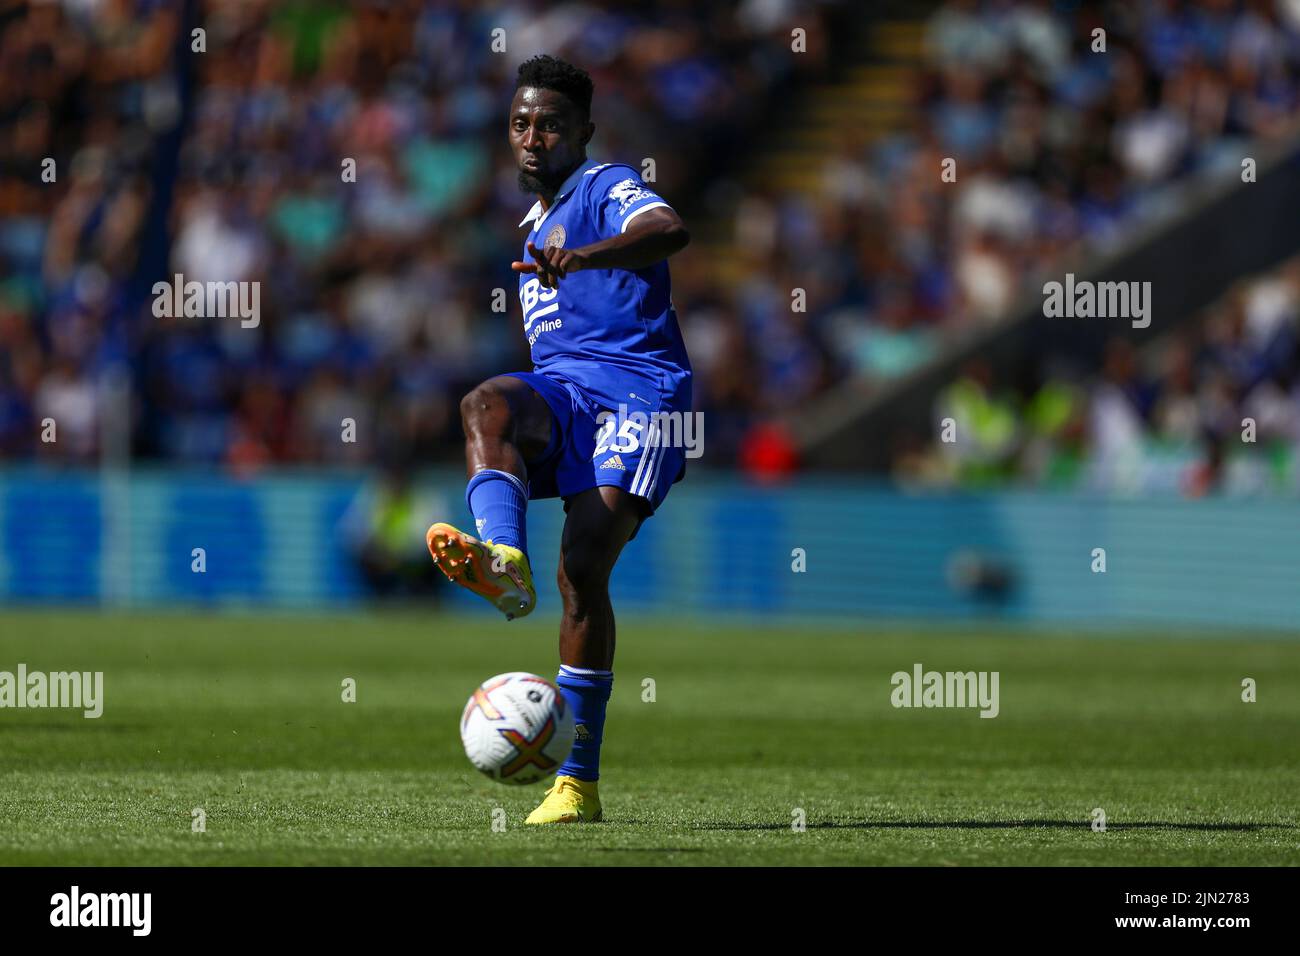 Wilfred Ndidi of Leicester City - Leicester City v Brentford, Premier League, King Power Stadium, Leicester, UK - 7th August 2022  Editorial Use Only - DataCo restrictions apply Stock Photo